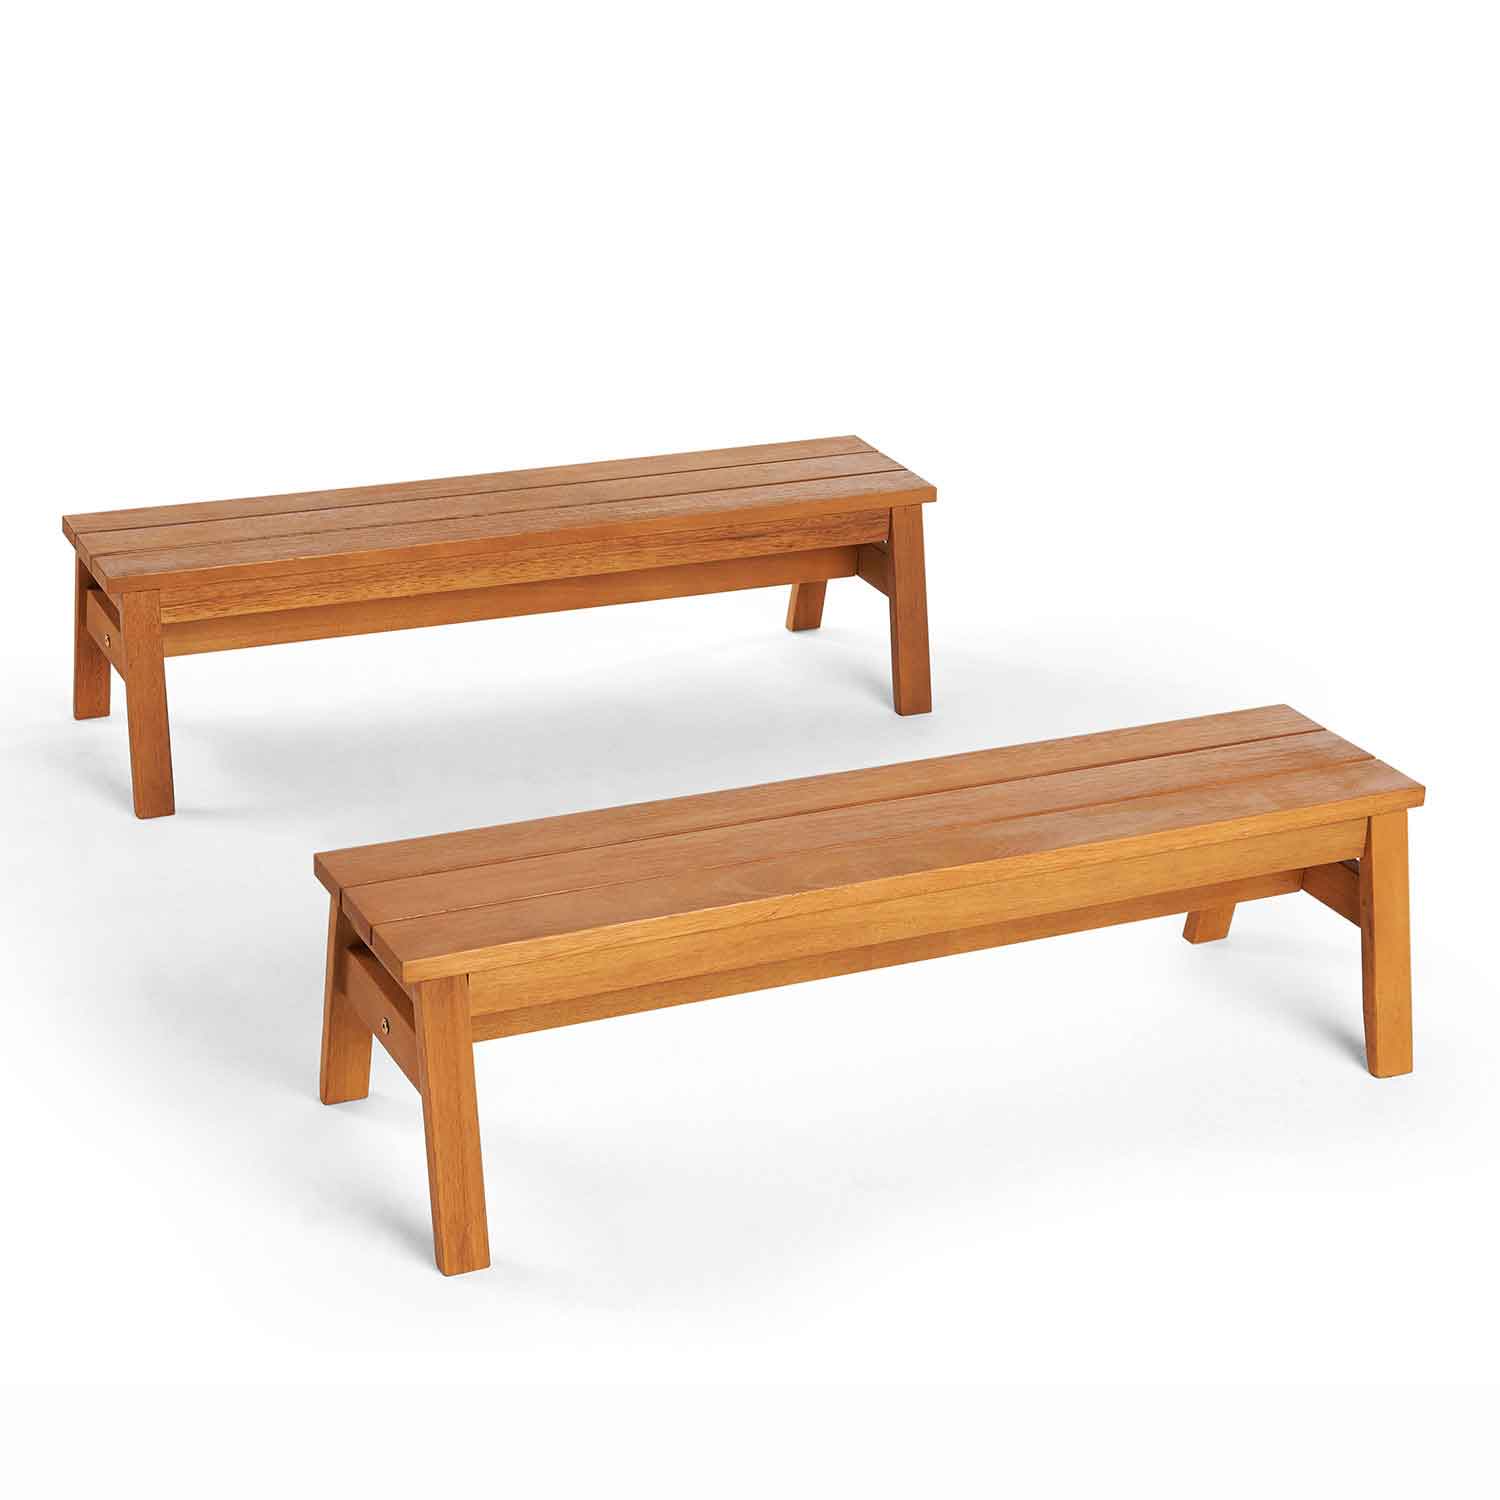 Outdoor Wooden Playground Benches, Wooden Bench Outdoor